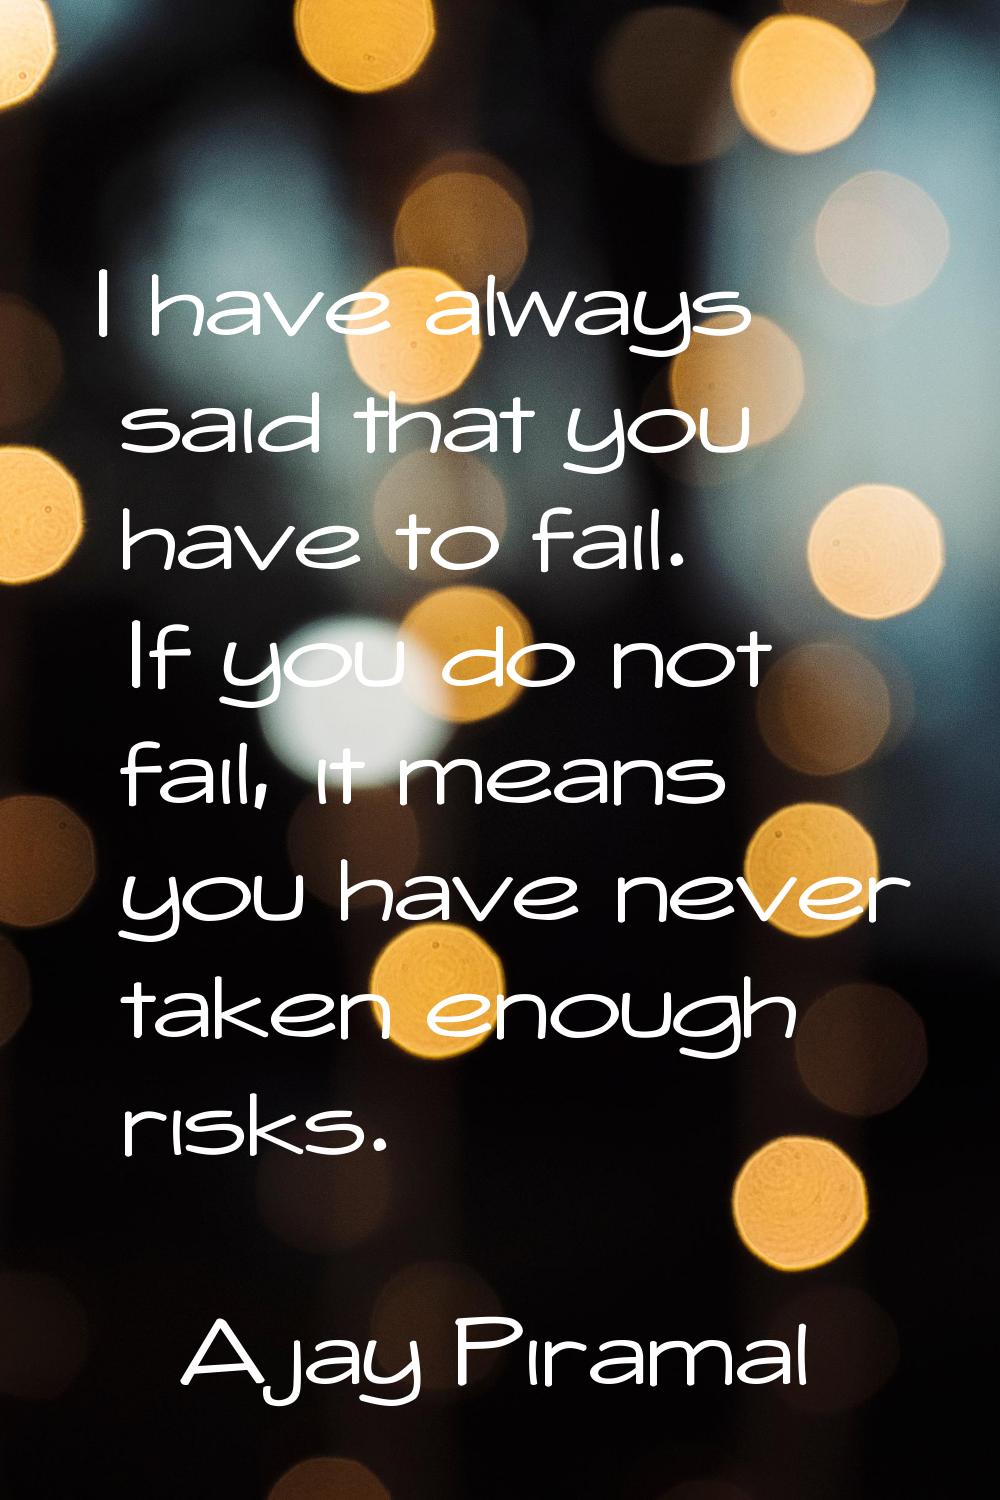 I have always said that you have to fail. If you do not fail, it means you have never taken enough 